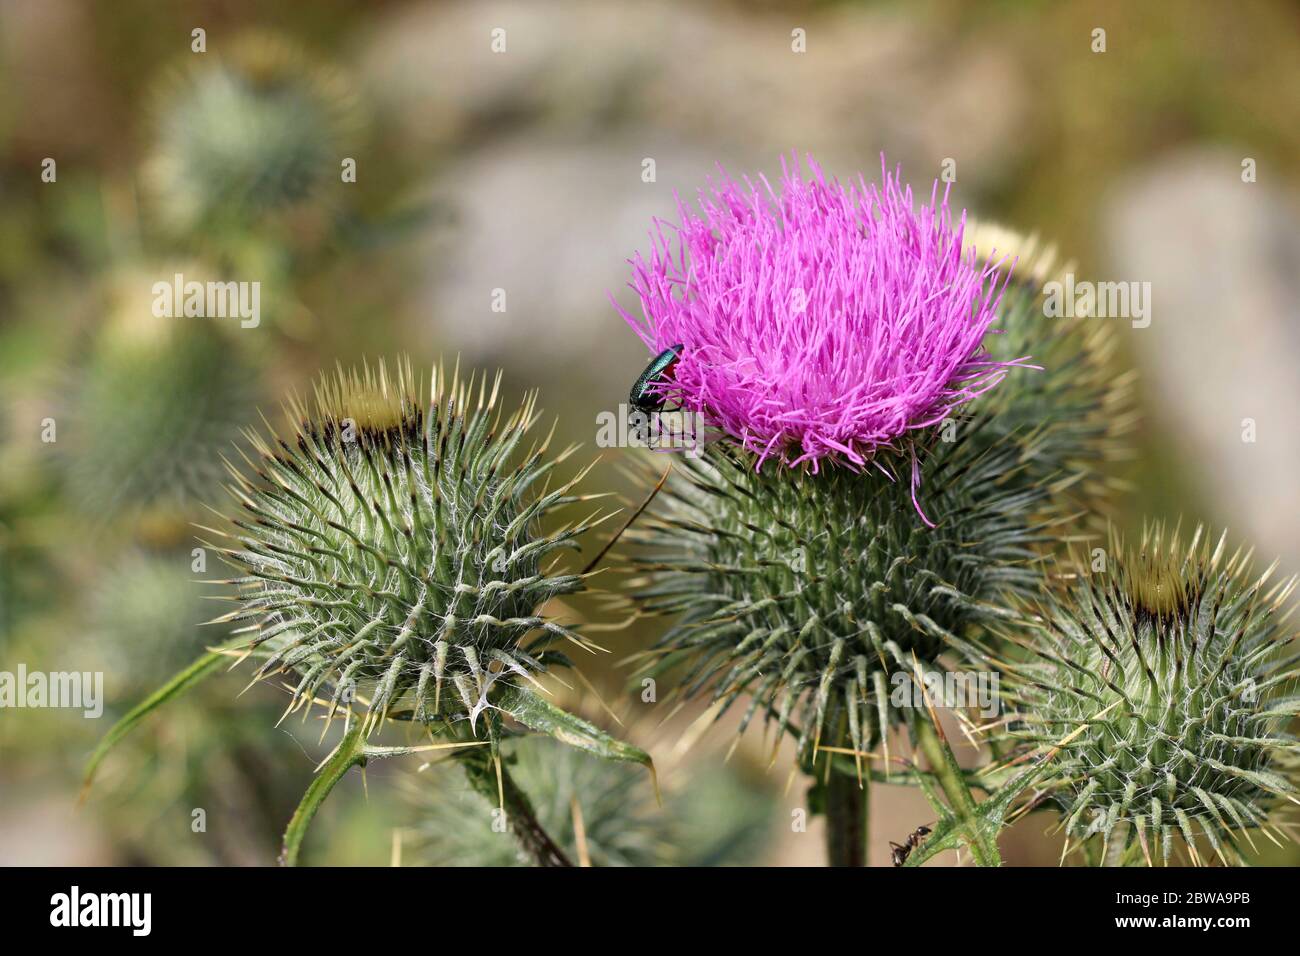 Wild Scottish Thistle (Saint Mary's Thistle, Marian Scotch thistle). Beautiful purple flower protected by a green, jagged, round shaped bulb Stock Photo